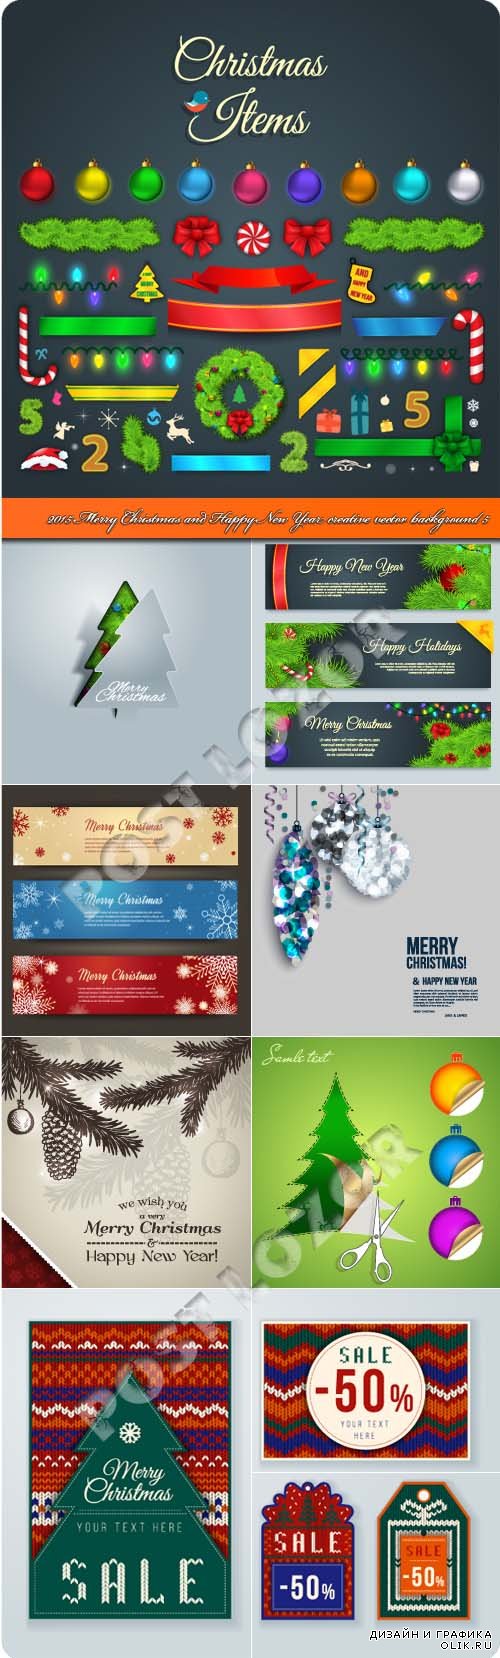 2015 Merry Christmas and Happy New Year creative vector background 5